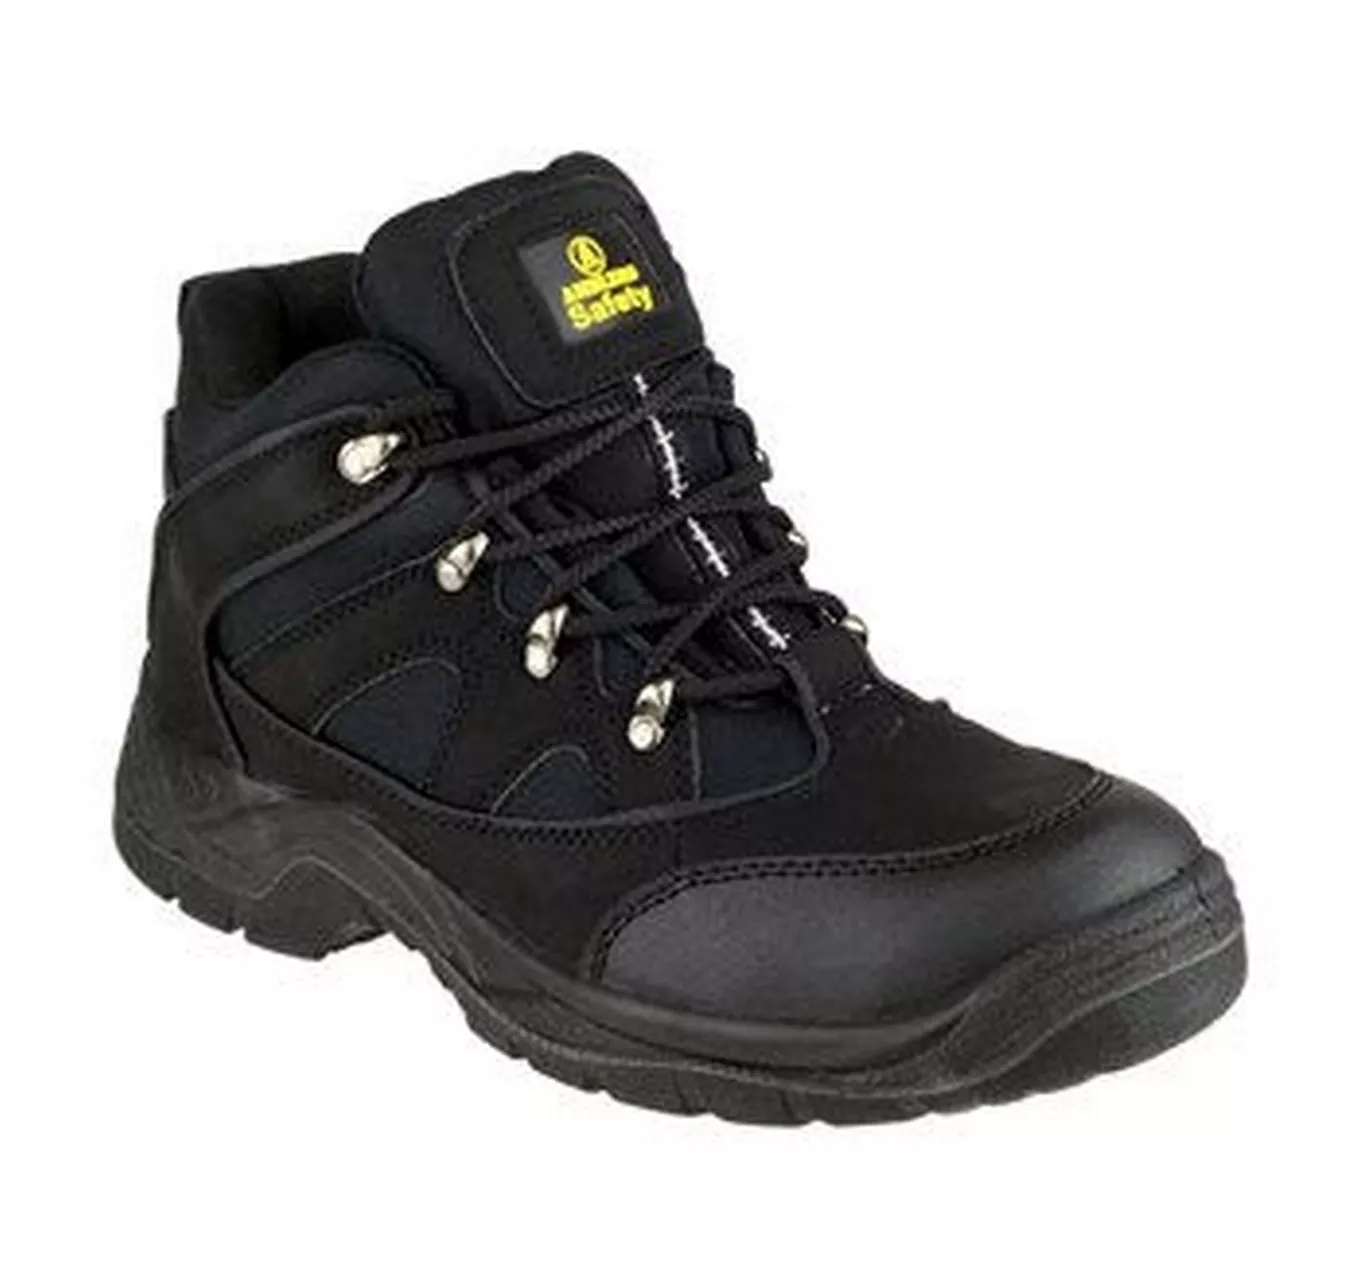 Safety Boot Amblers Fs151 12